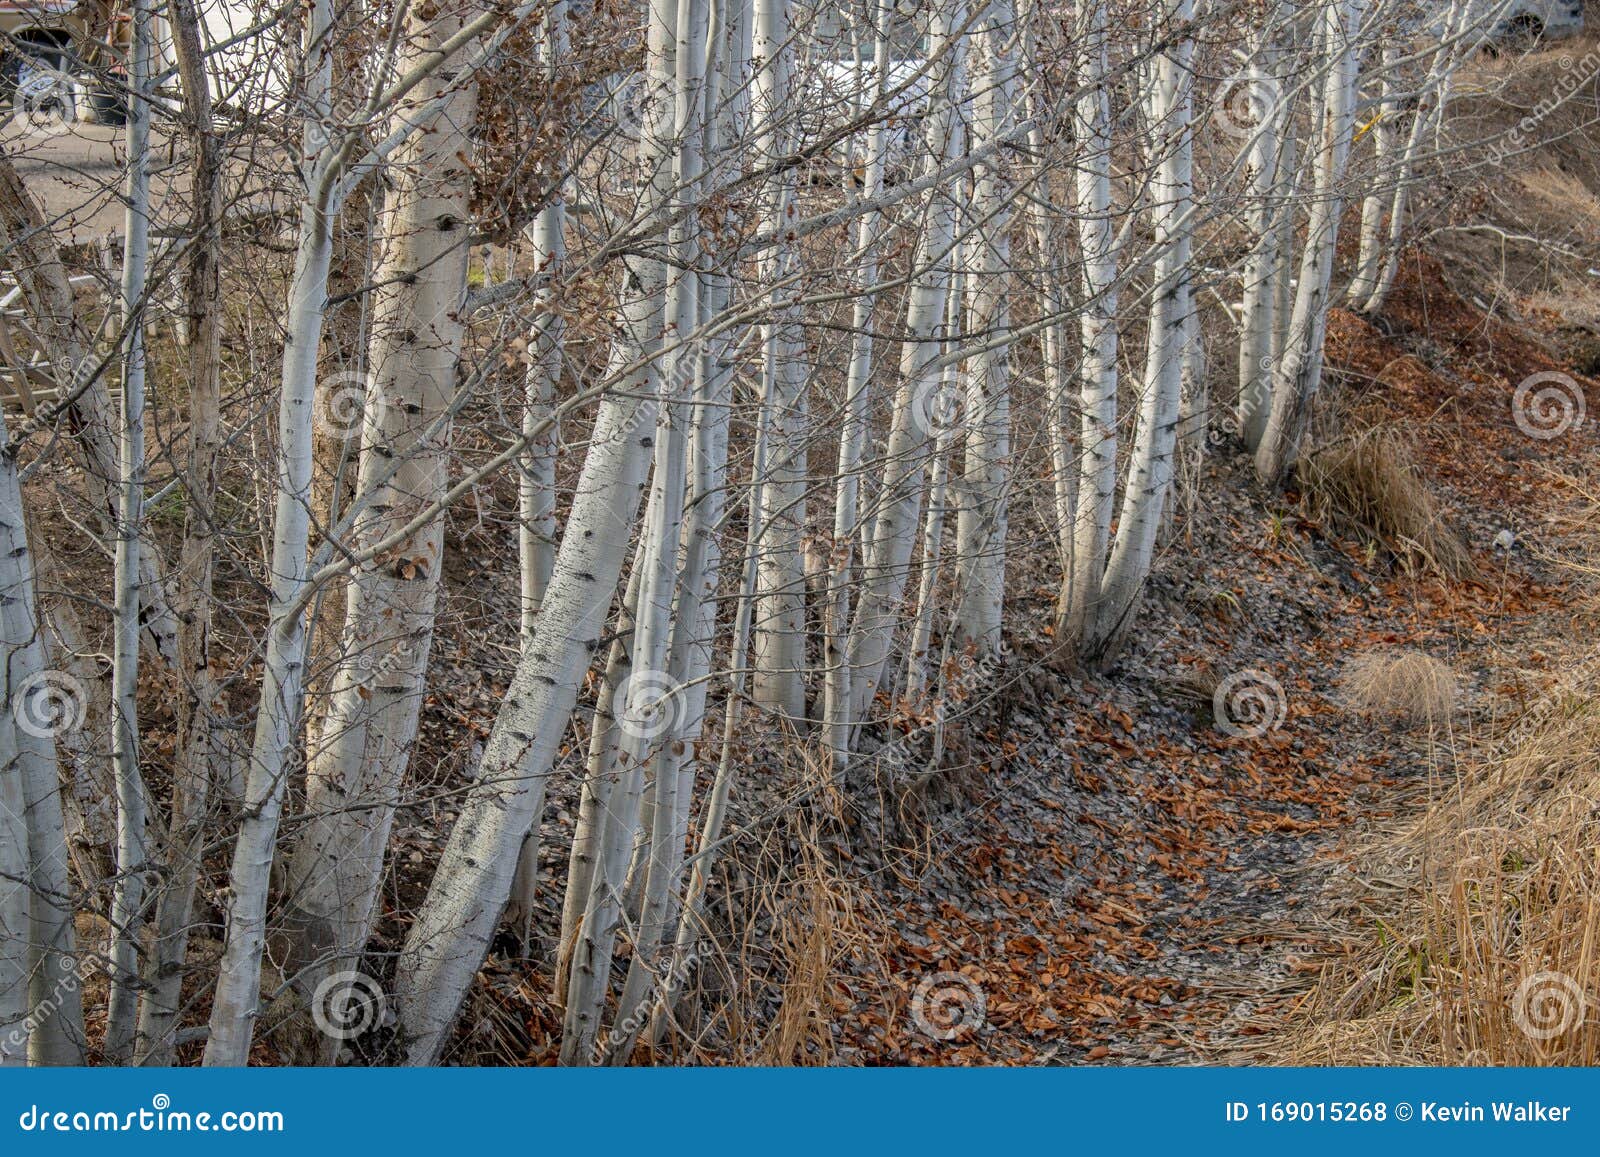 White Barked Quaking Aspen Trees Growing Along a Dry Ditch Bank in the